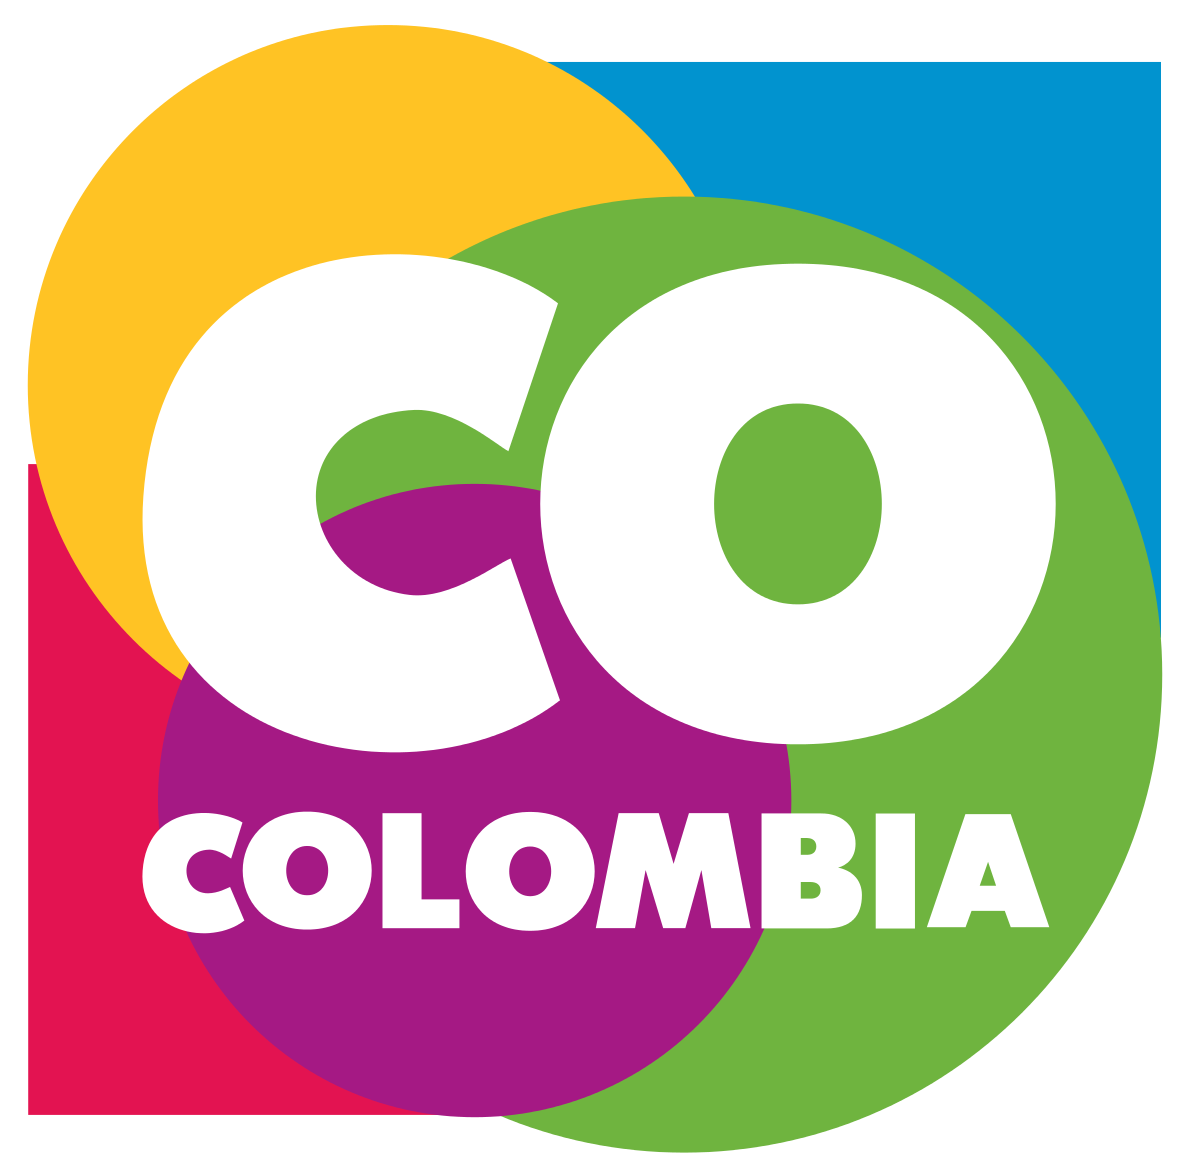 Logo colombia.co